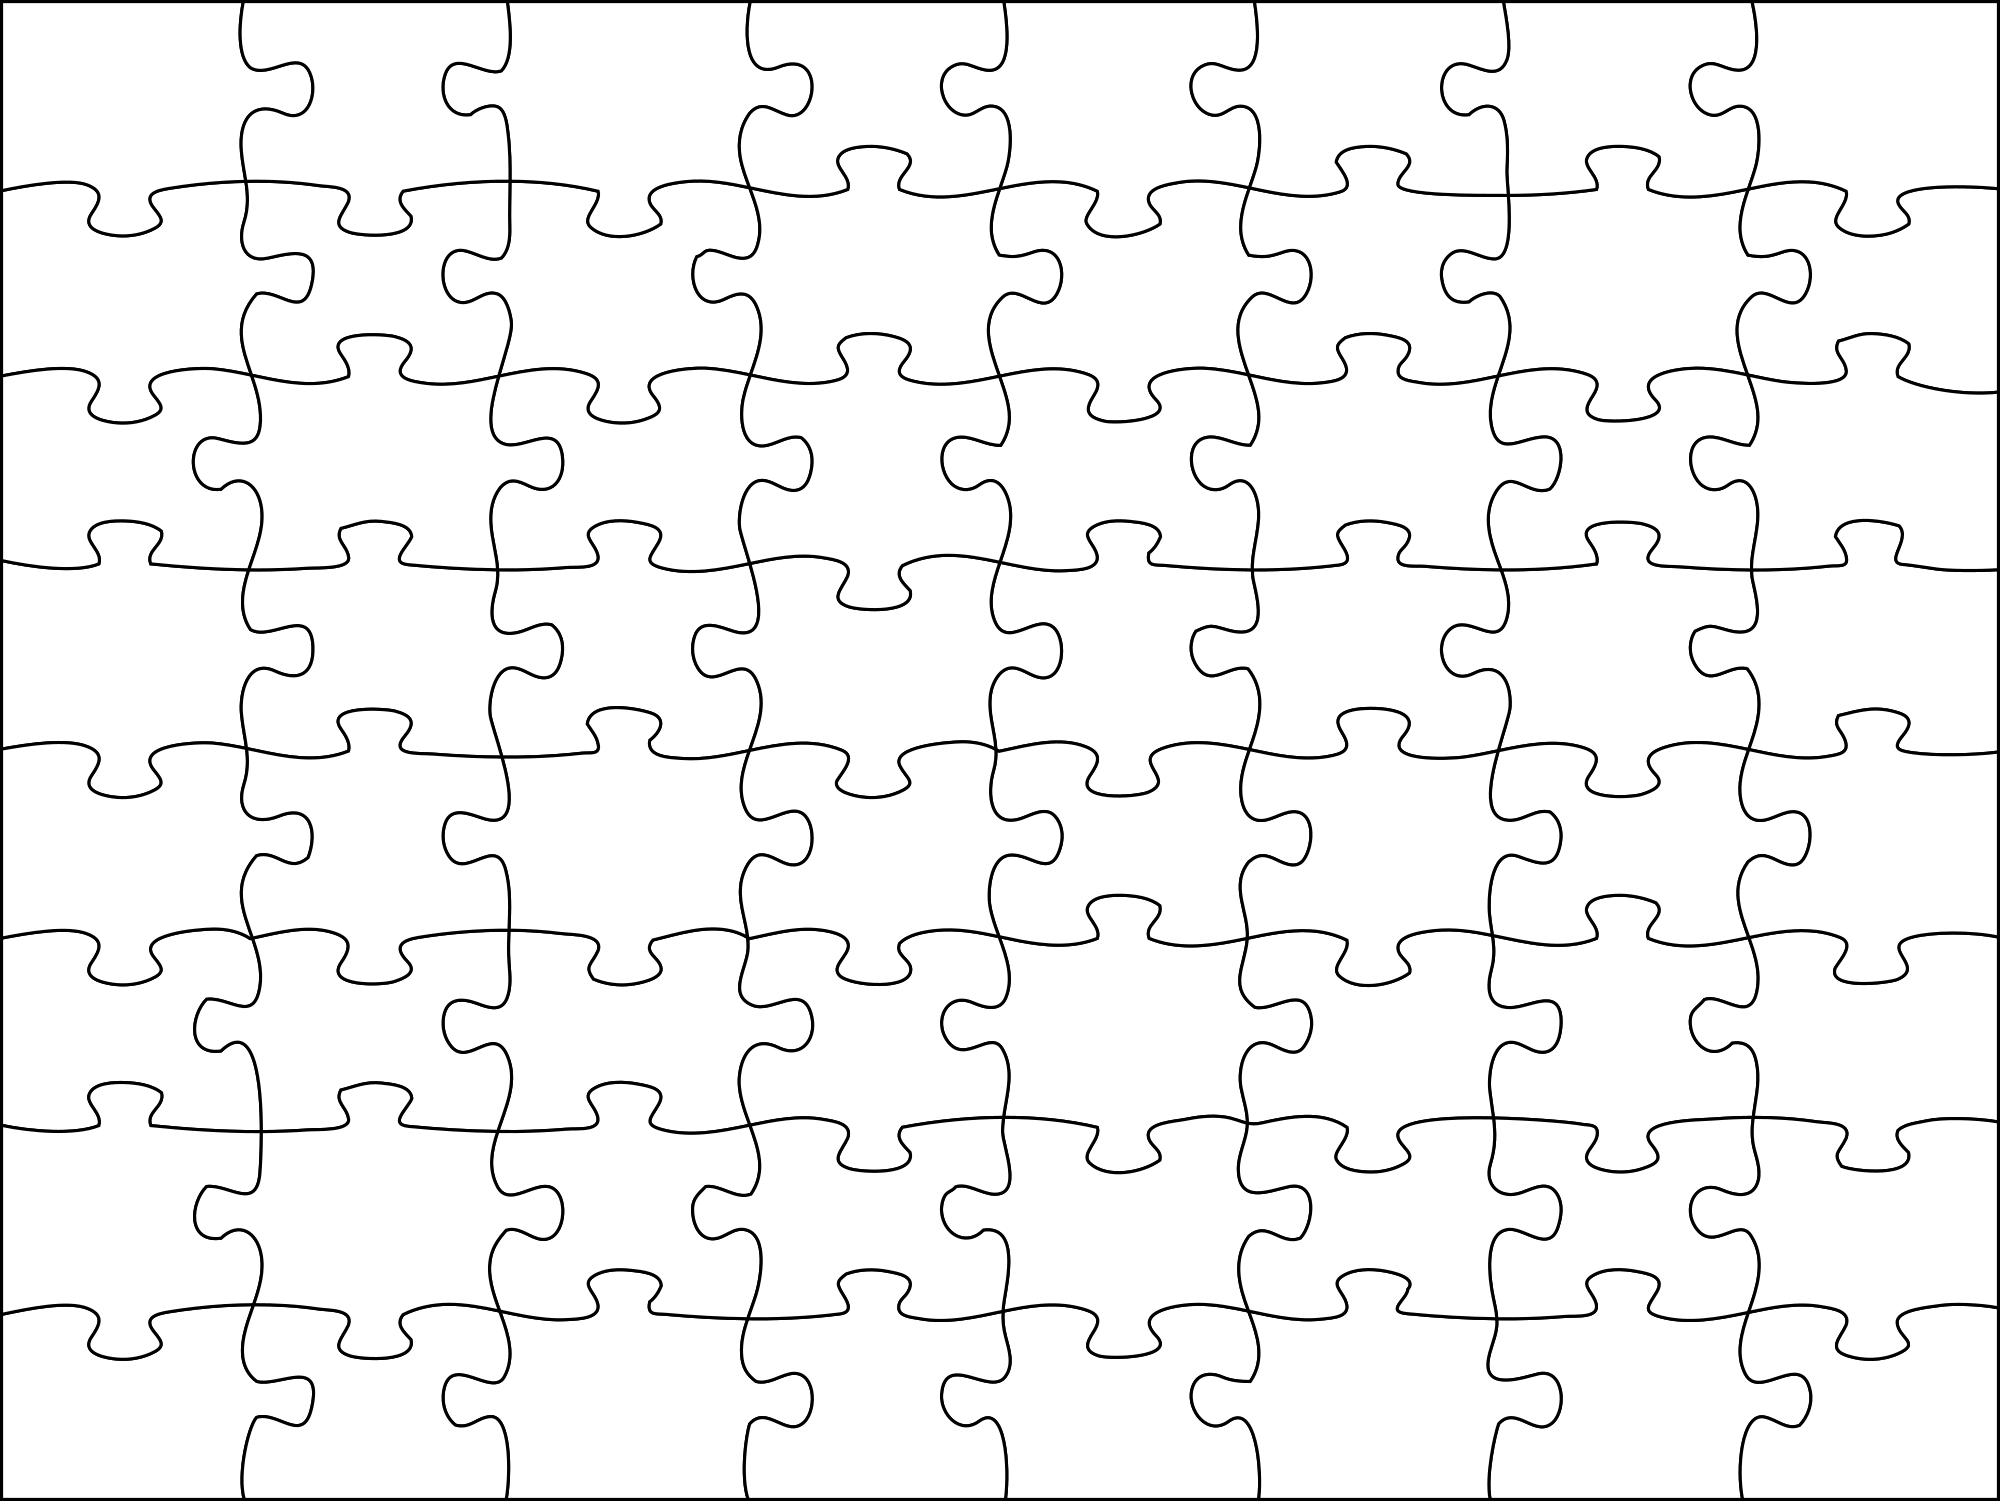 jigsaw puzzle game match puzz